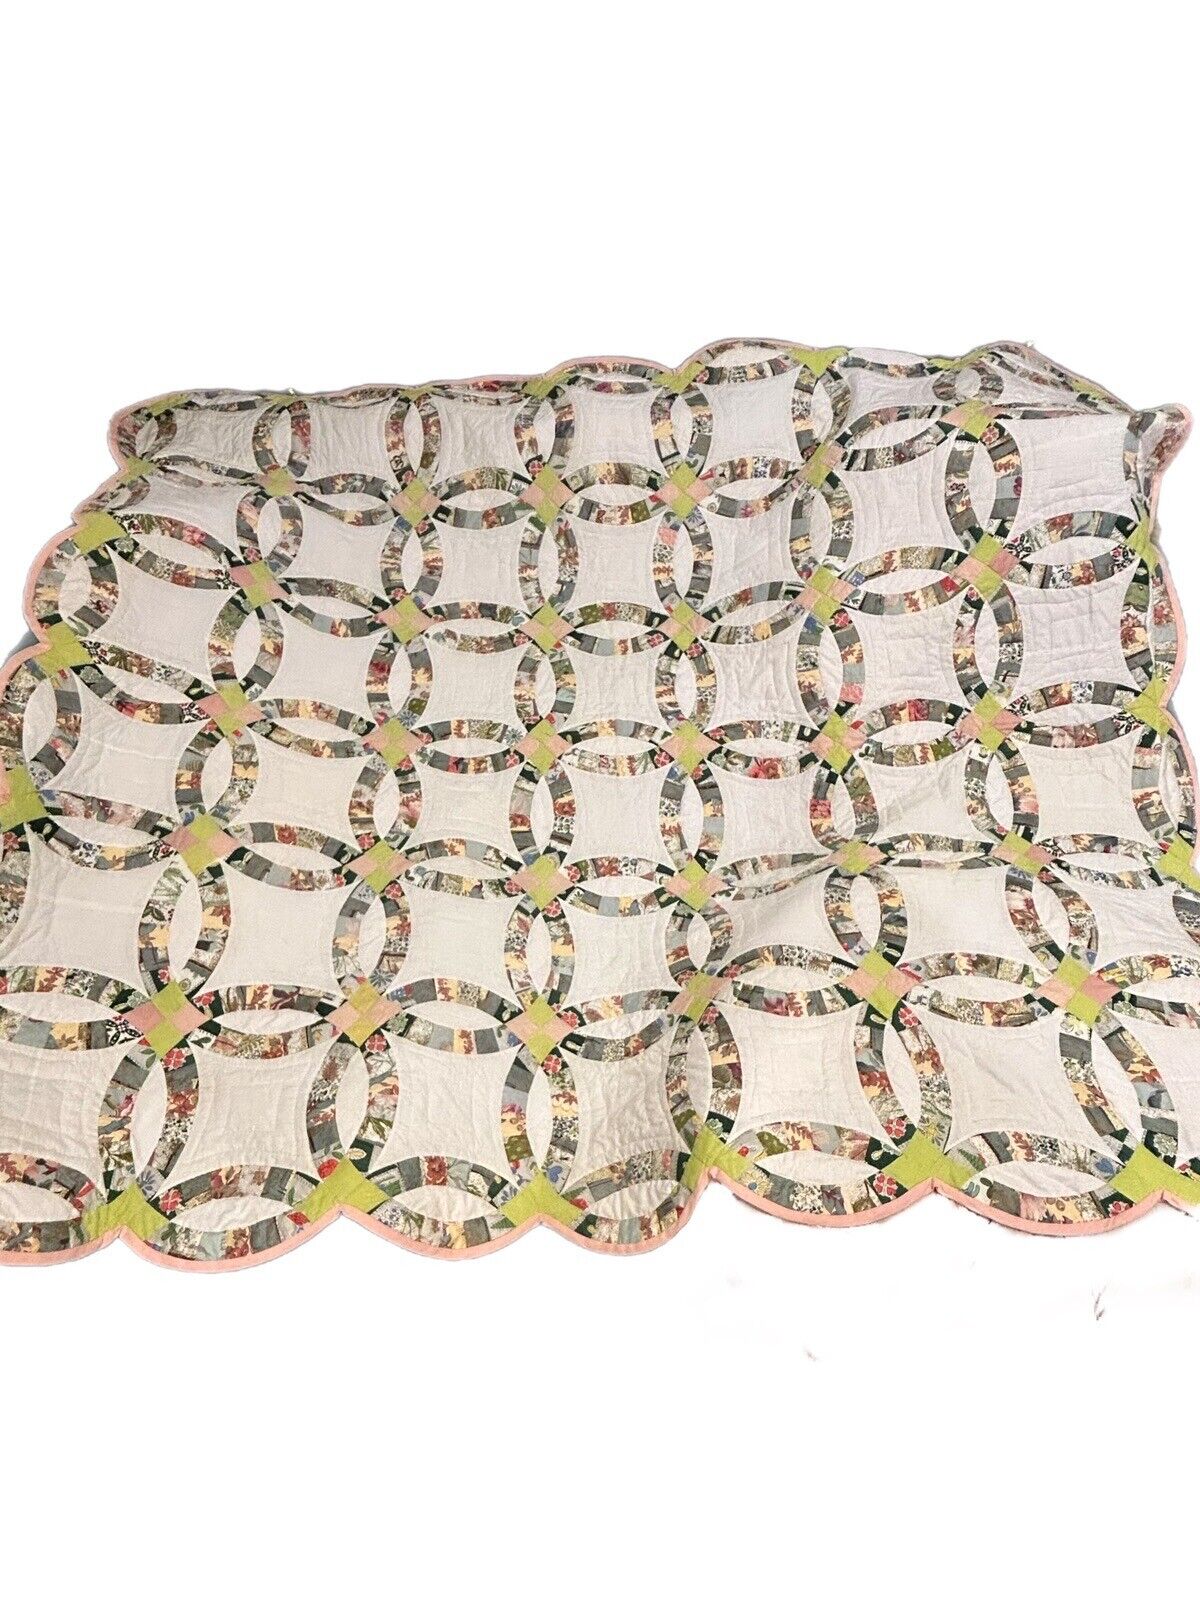 Gorgeous Antique Handmade Double Wedding Ring Quilt c. 1920s - Great Color Combo